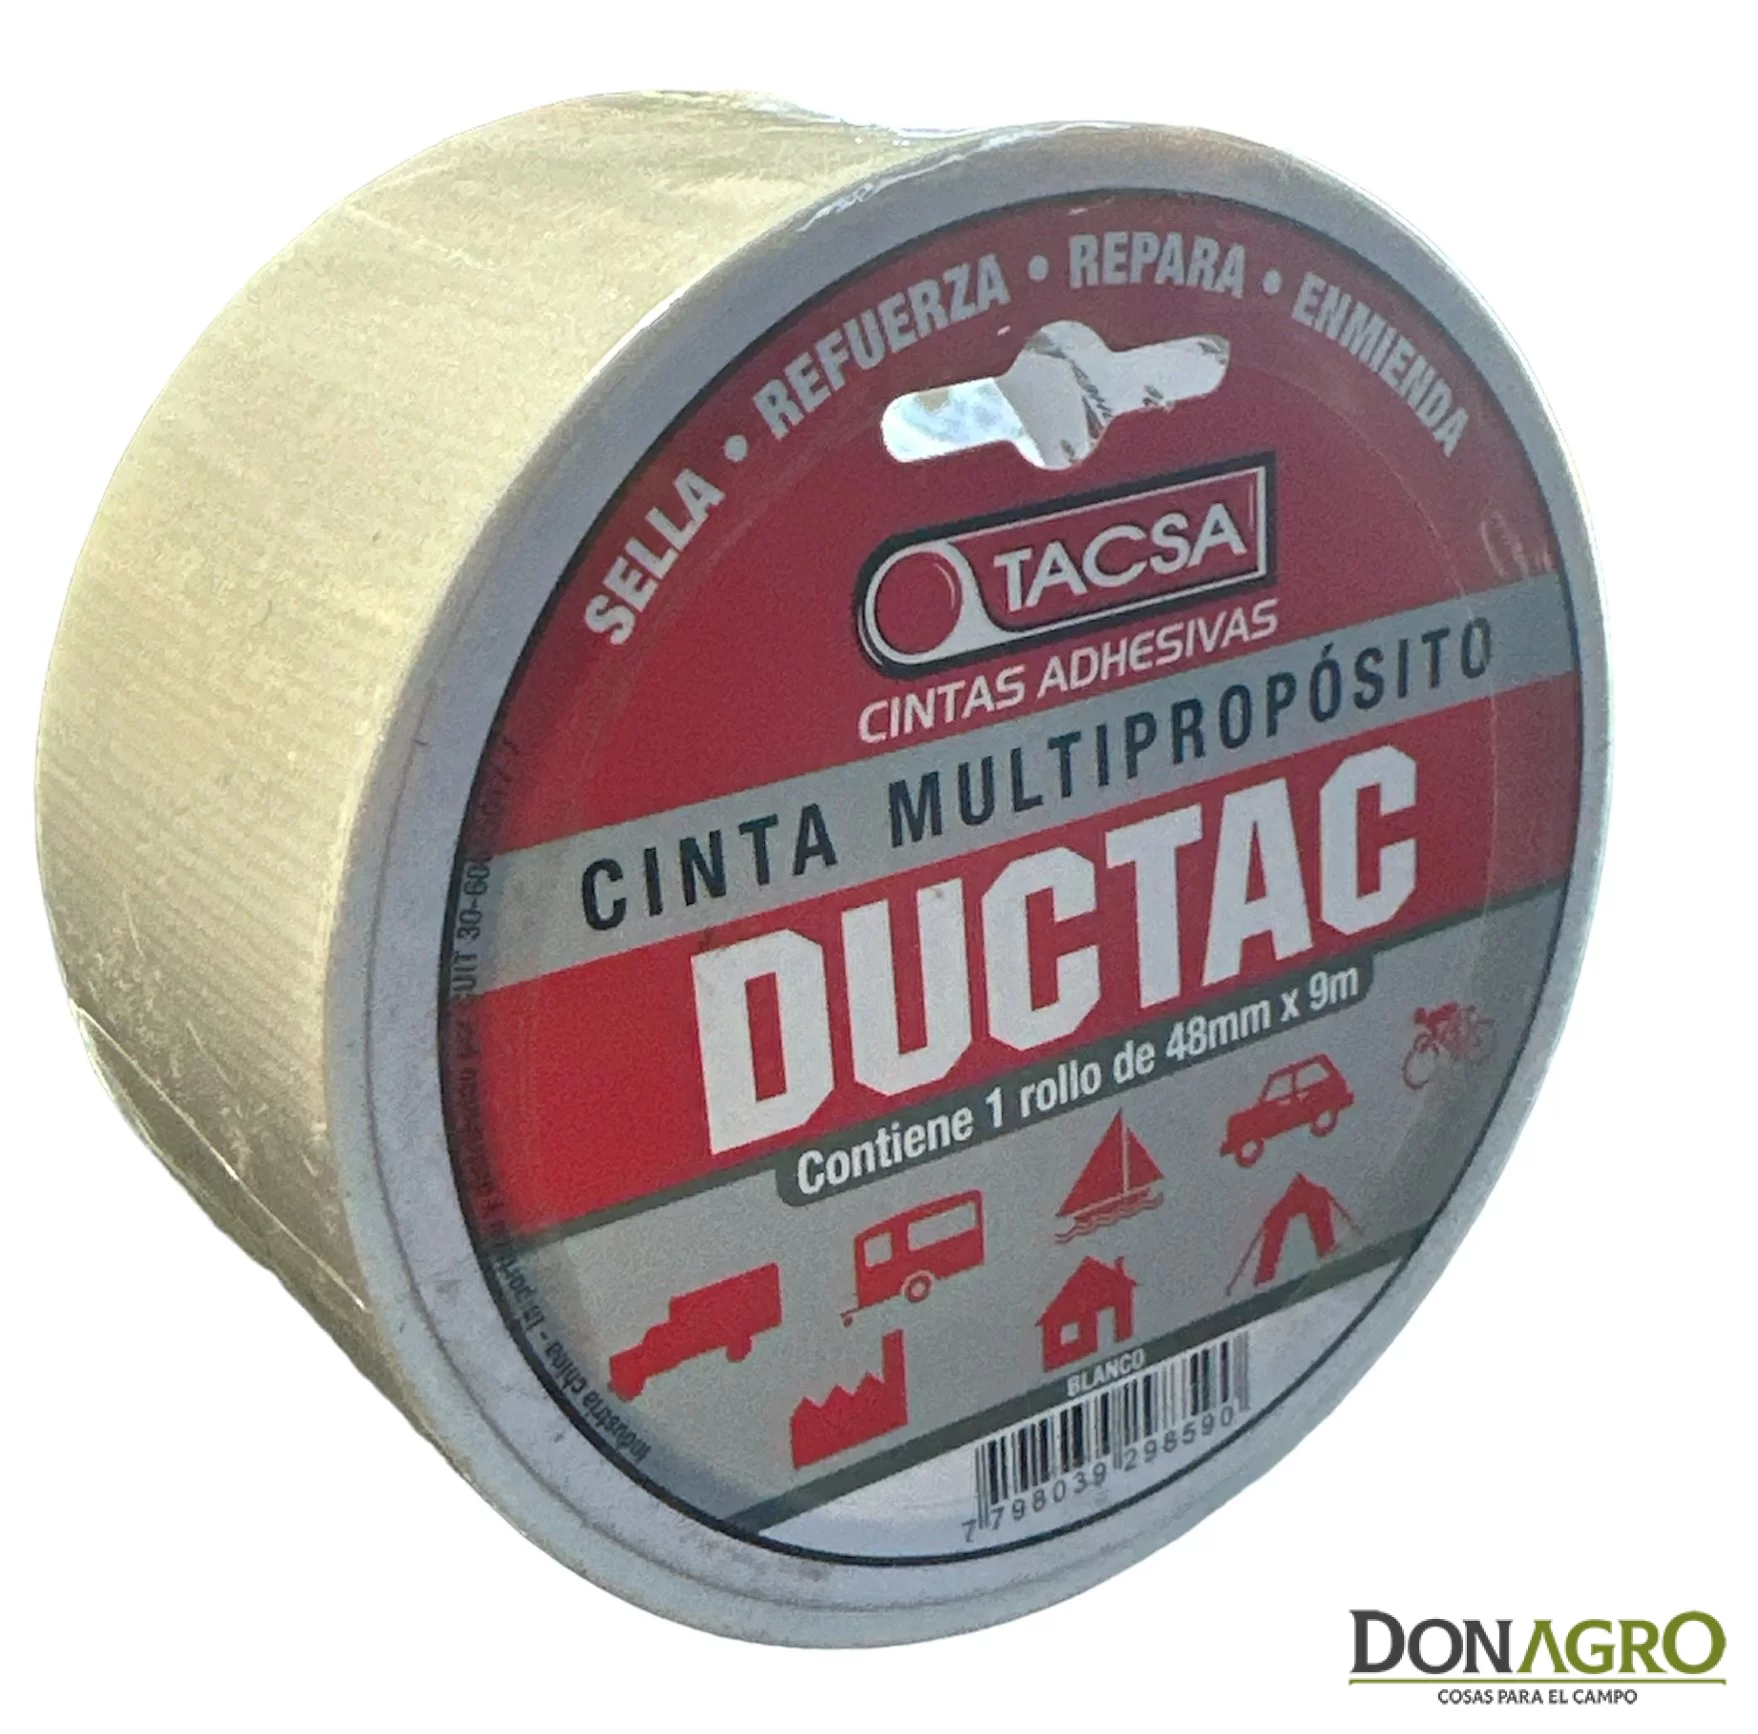 Cinta Multiproposito DUCTAC 9mts